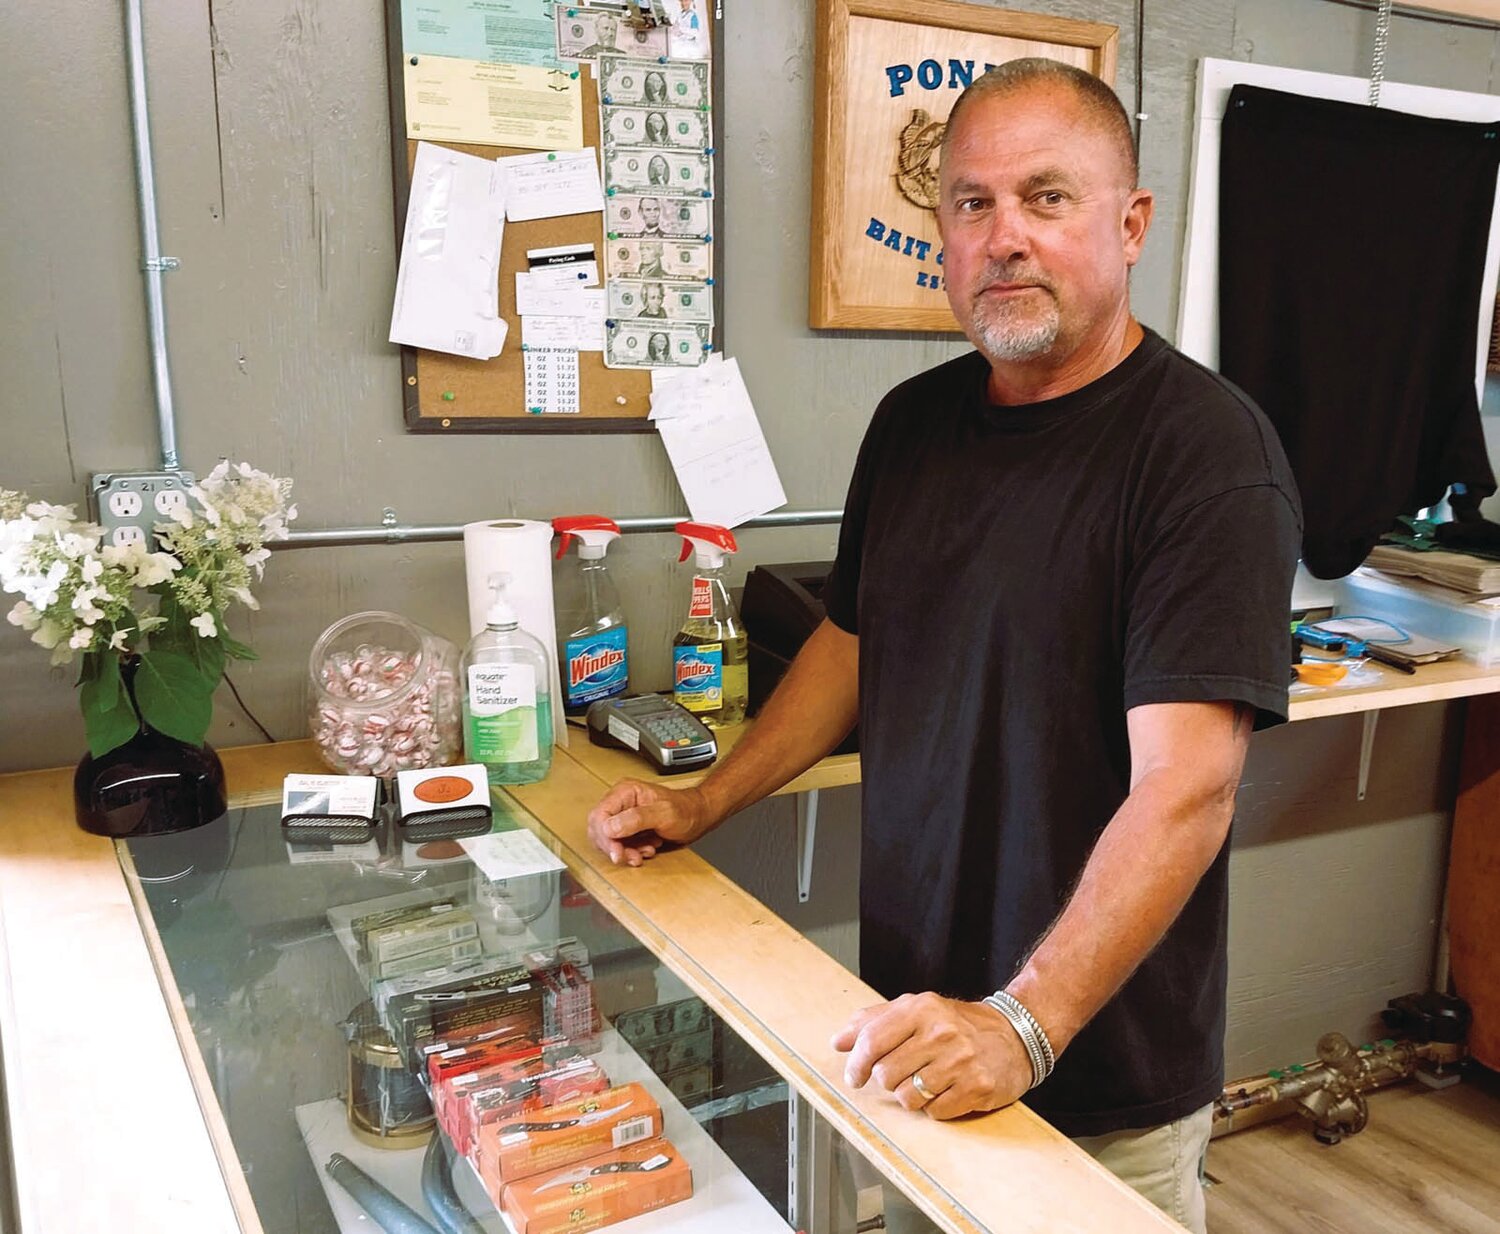 COMMUNITY ROOTS: Tom Olson of the new Ponaug Bait & Tackle, 287 Arnolds Neck Road, grew up in Warwick, who went Tollgate High School and worked for RI Boat Moving at Ponaug Marina. (Submitted photo)